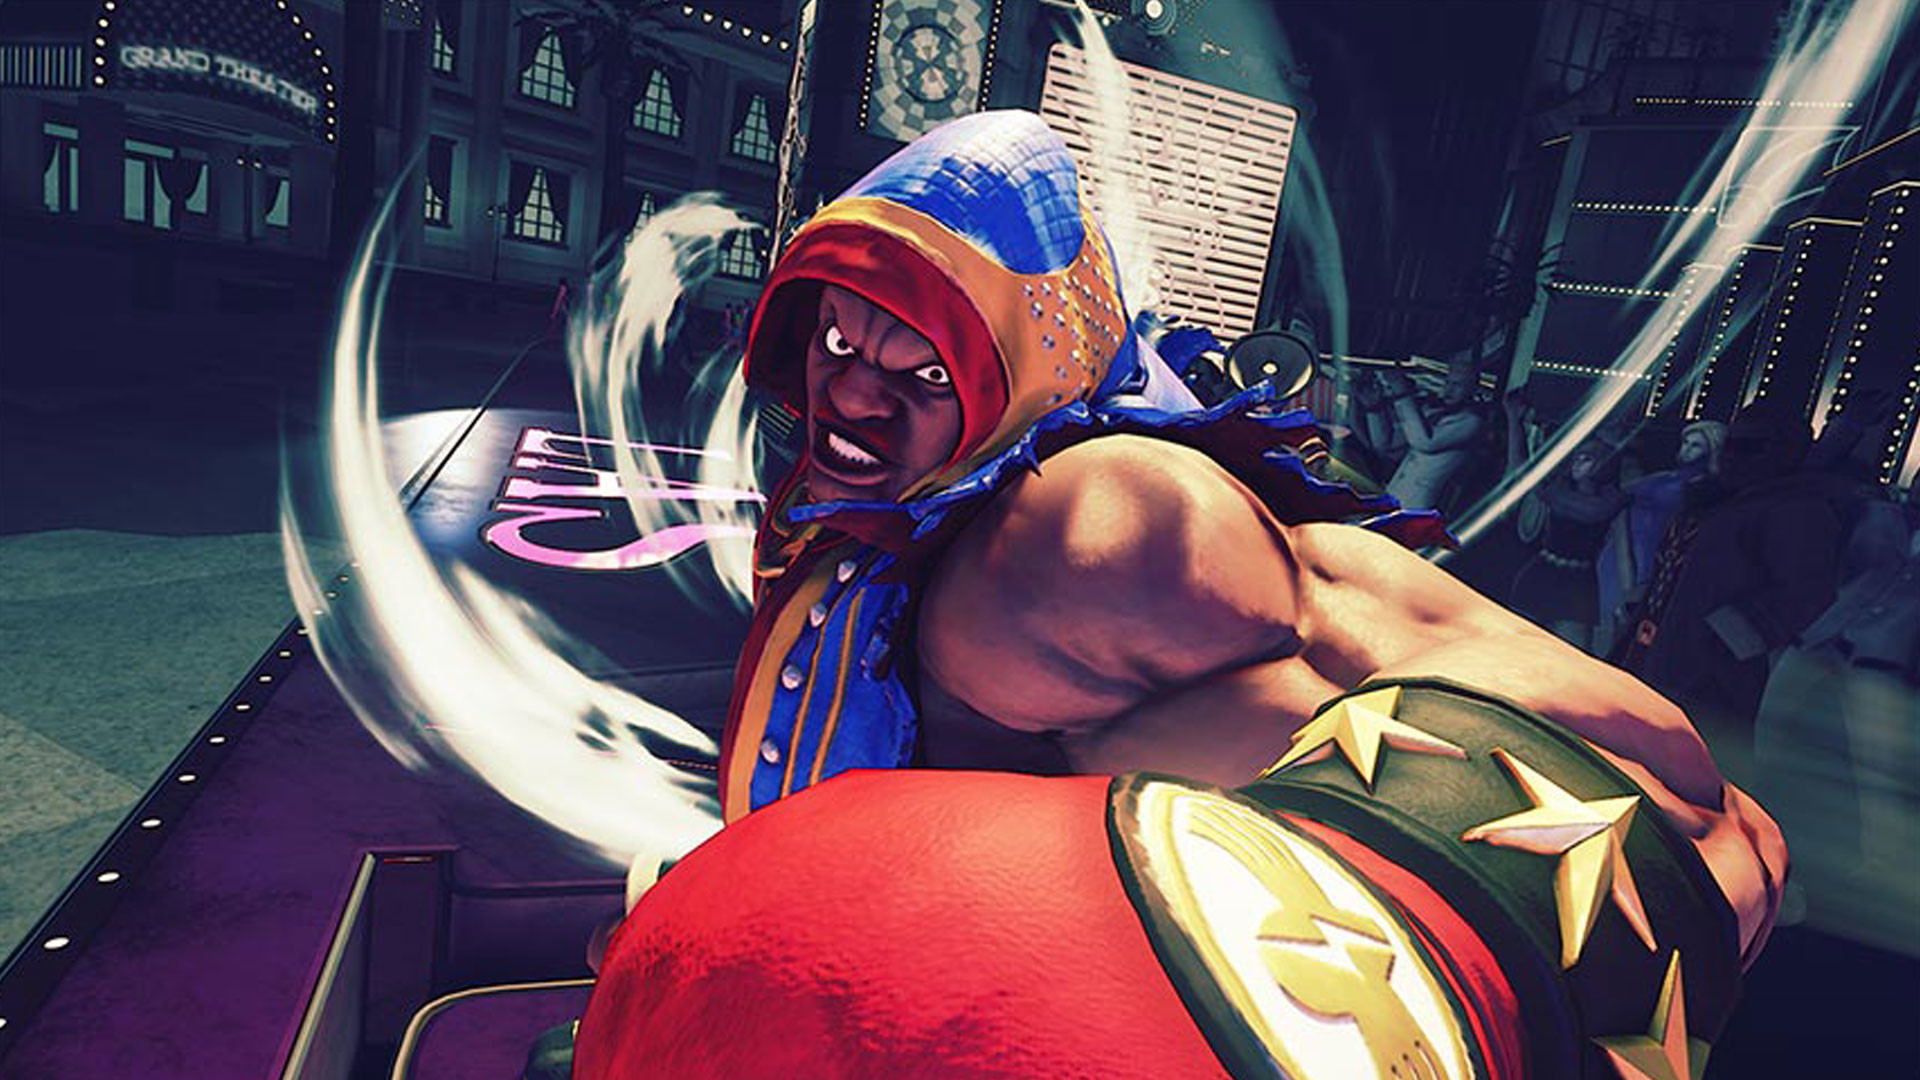 1920x1080 Street Fighter V's June update pushed to July, but we're getting Balrog |  ZAM - The Largest Collection of Online Gaming Information